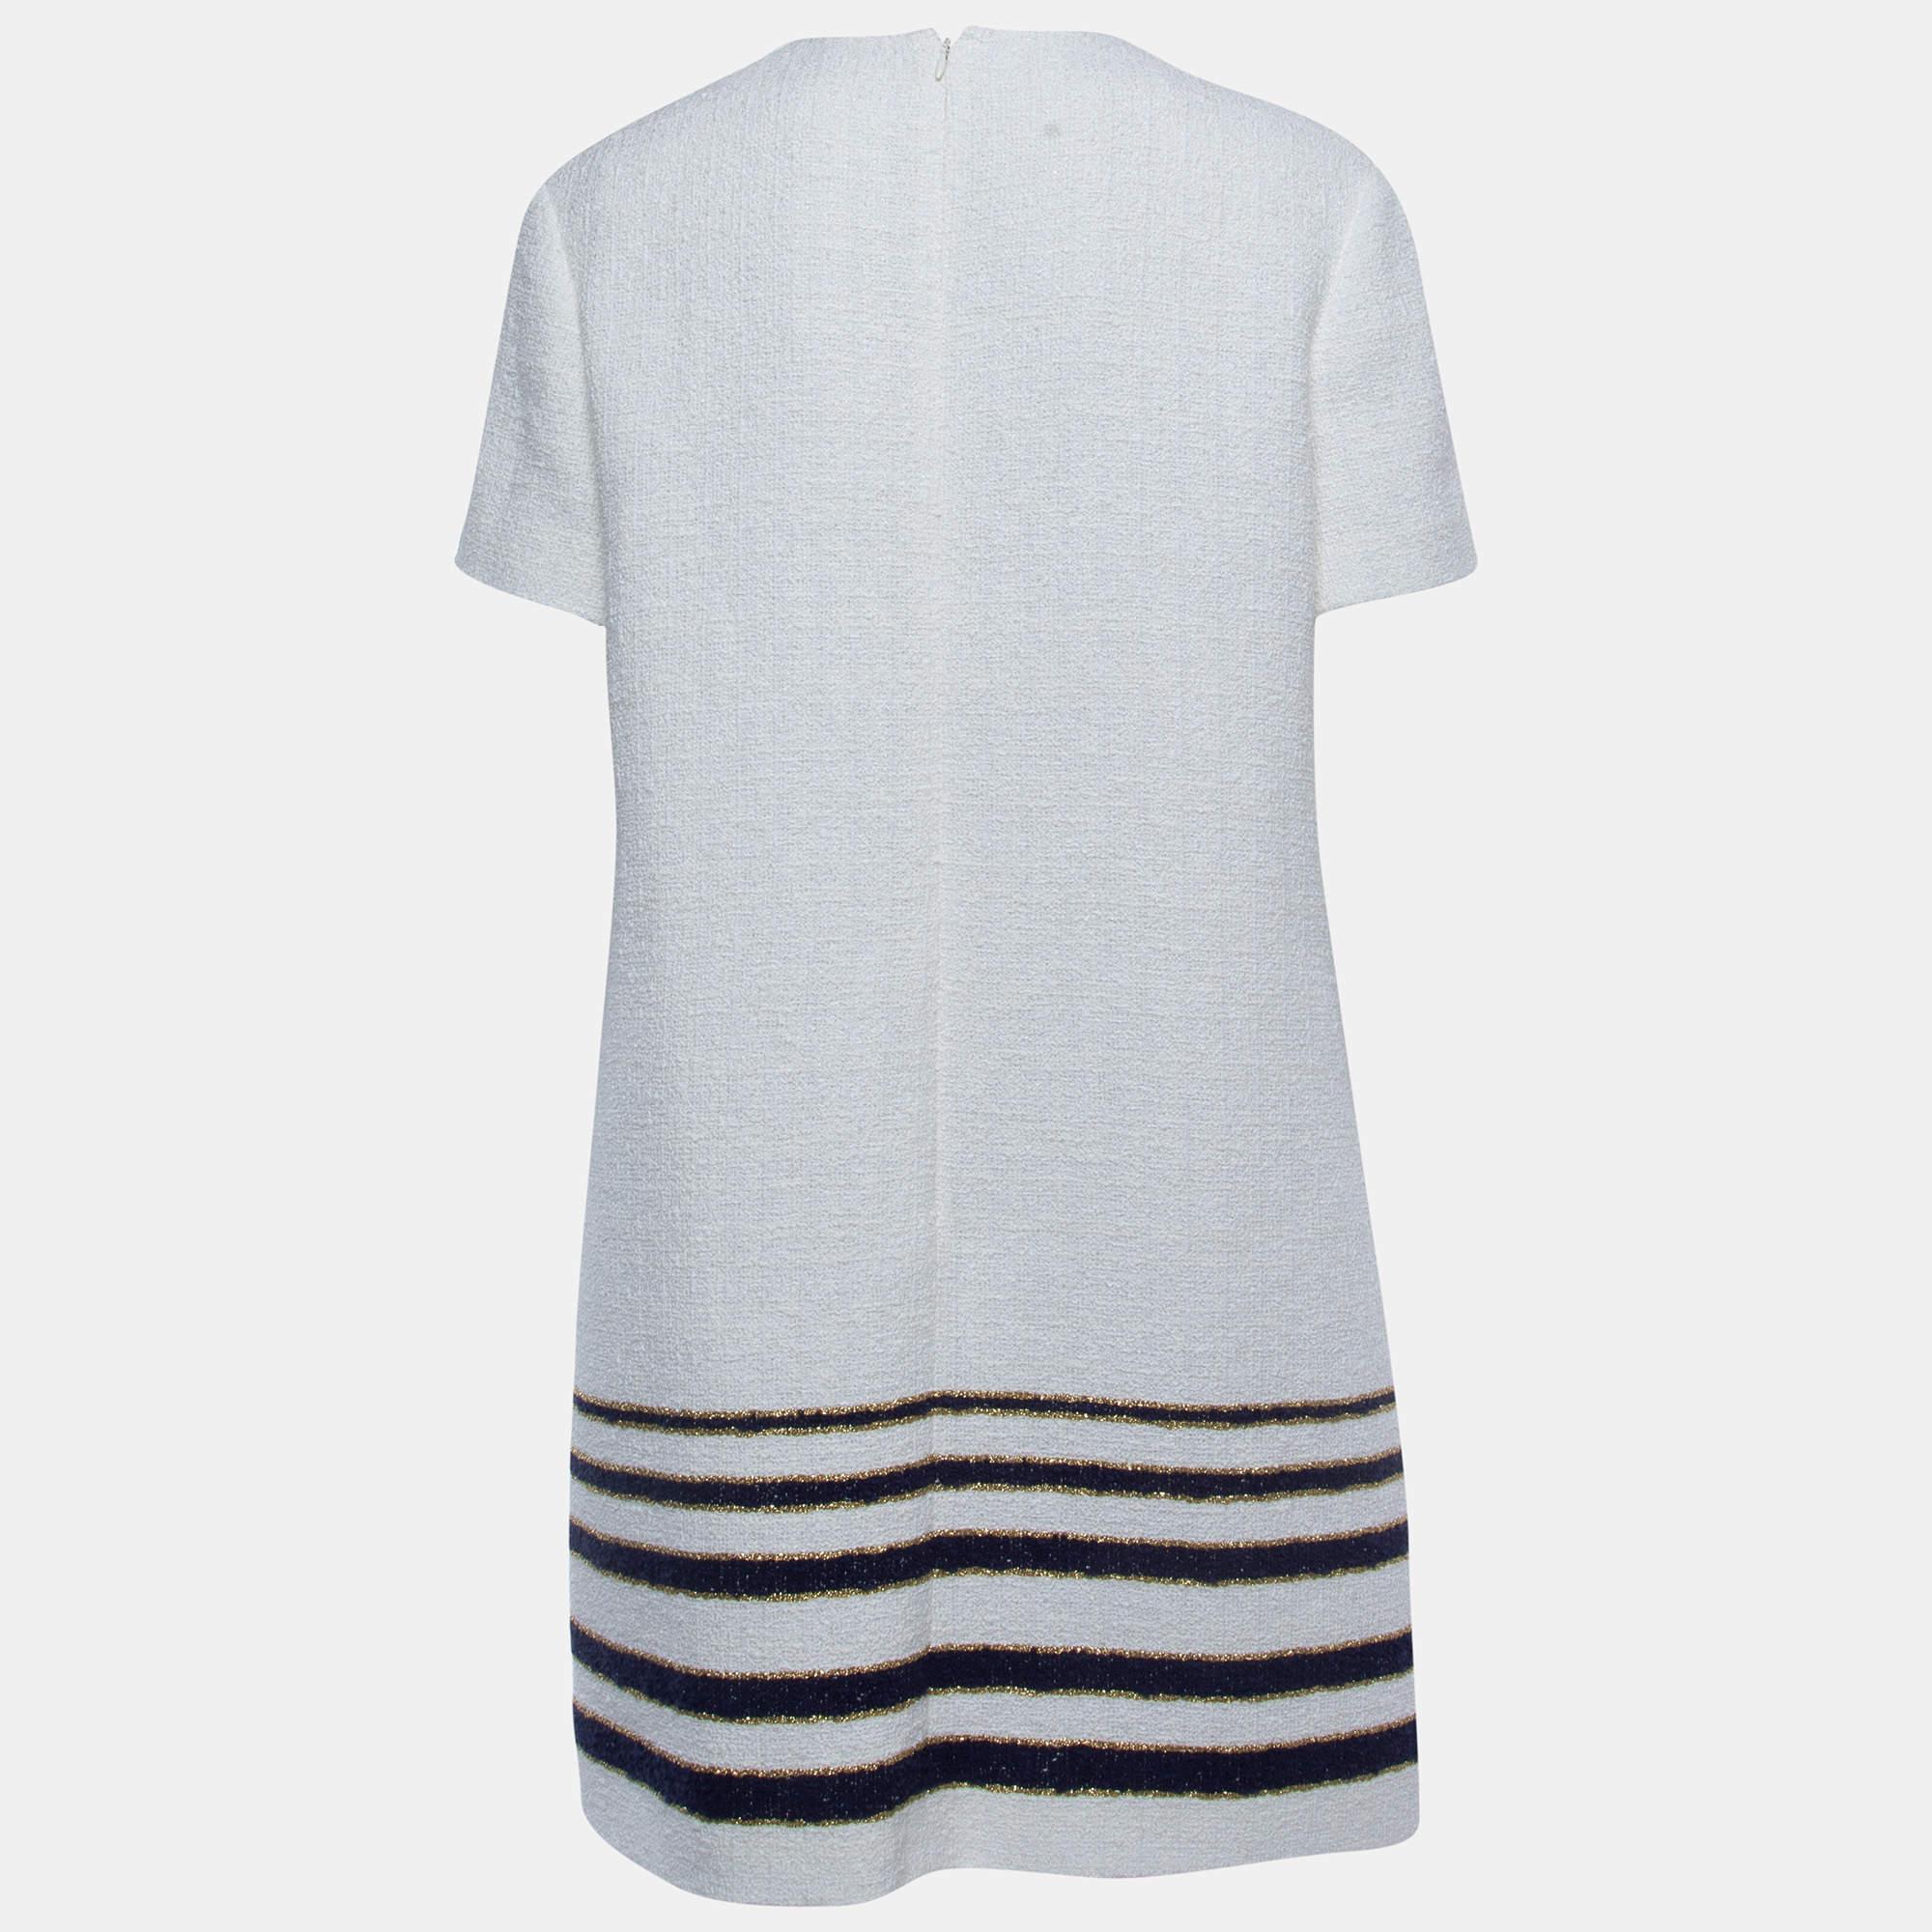 Women's Valentino White/Blue Striped Patterned Tweed Shift Dress XL